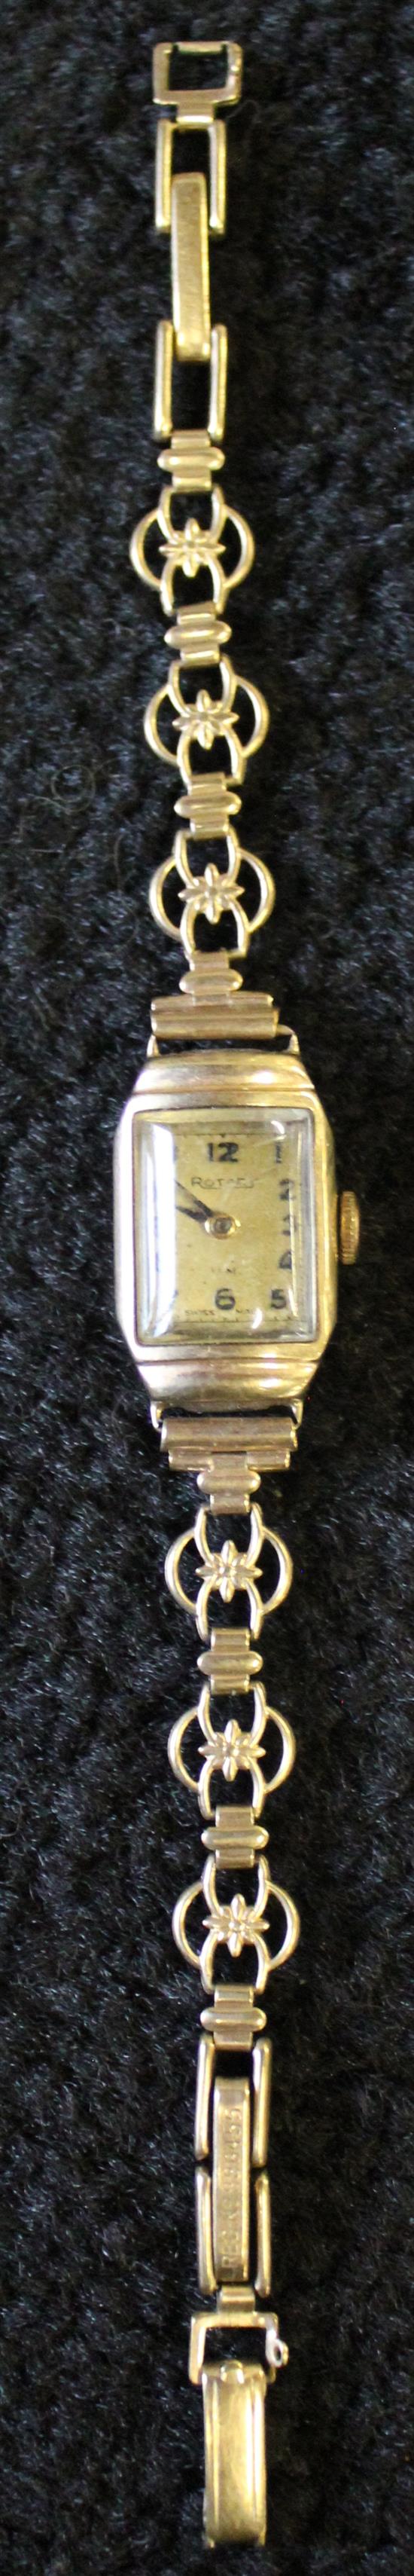 A ladies 9ct gold Rotary bracelet wrist watch with rectangular face